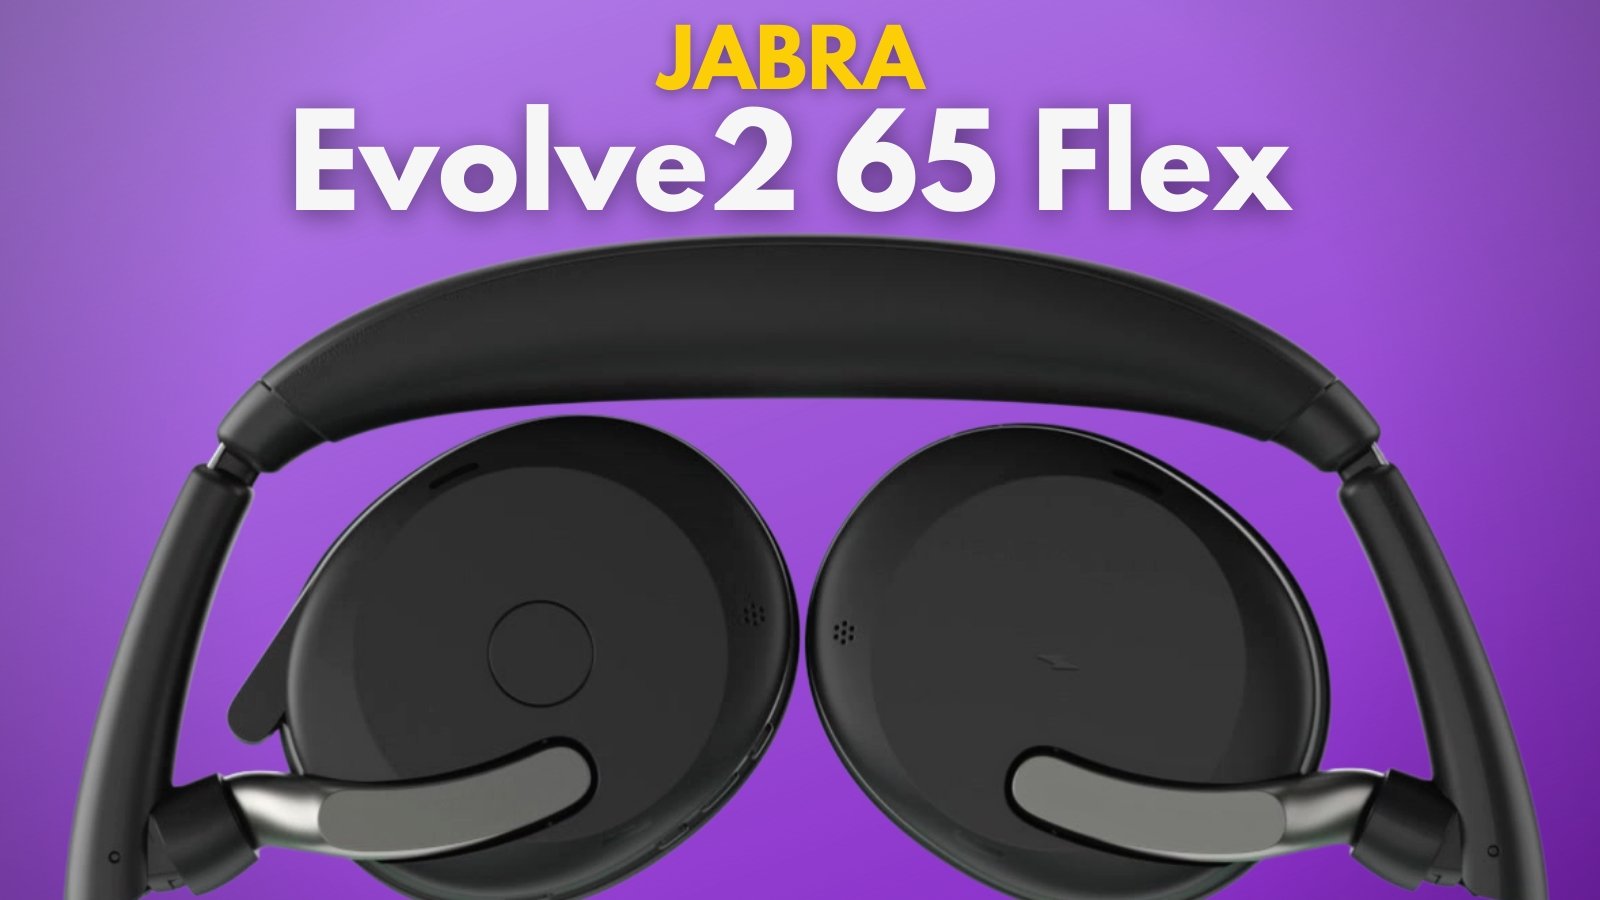 The Ultimate Headset For Remote, and Hybrid Workers: Jabra Evolve2 65 Flex - Headset Advisor